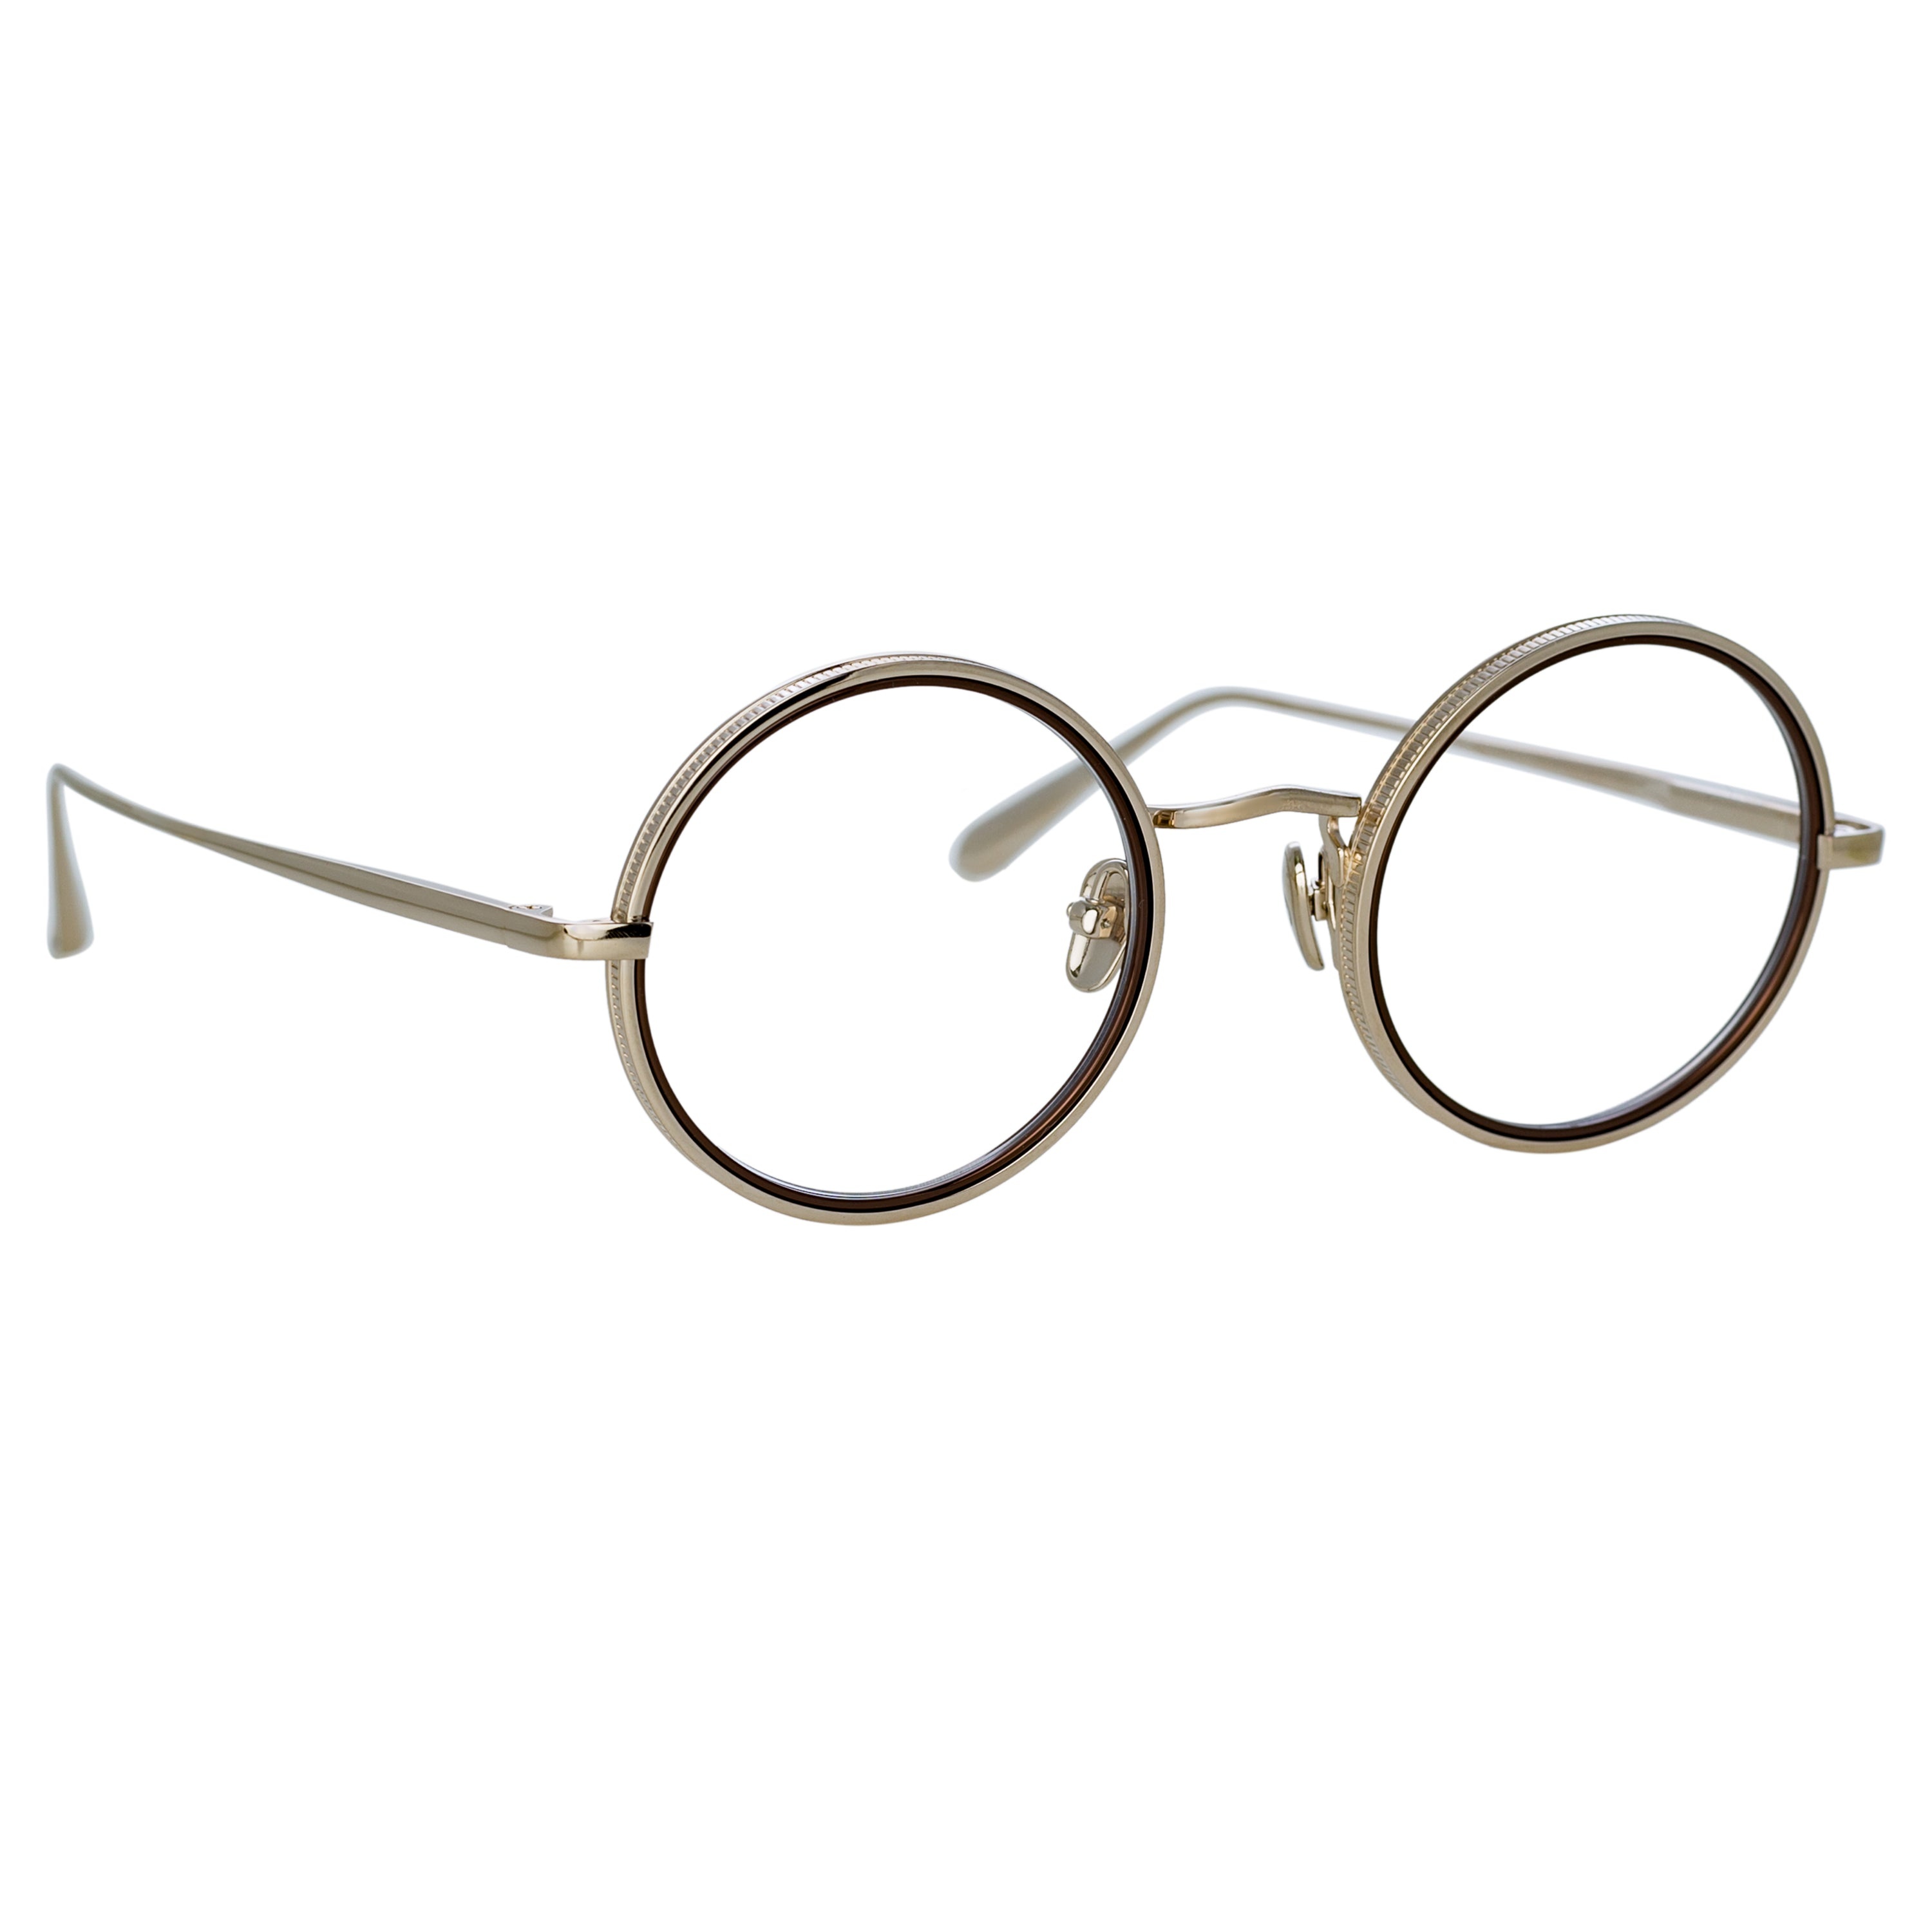 CORTINA OVAL OPTICAL FRAME IN LIGHT GOLD - 2